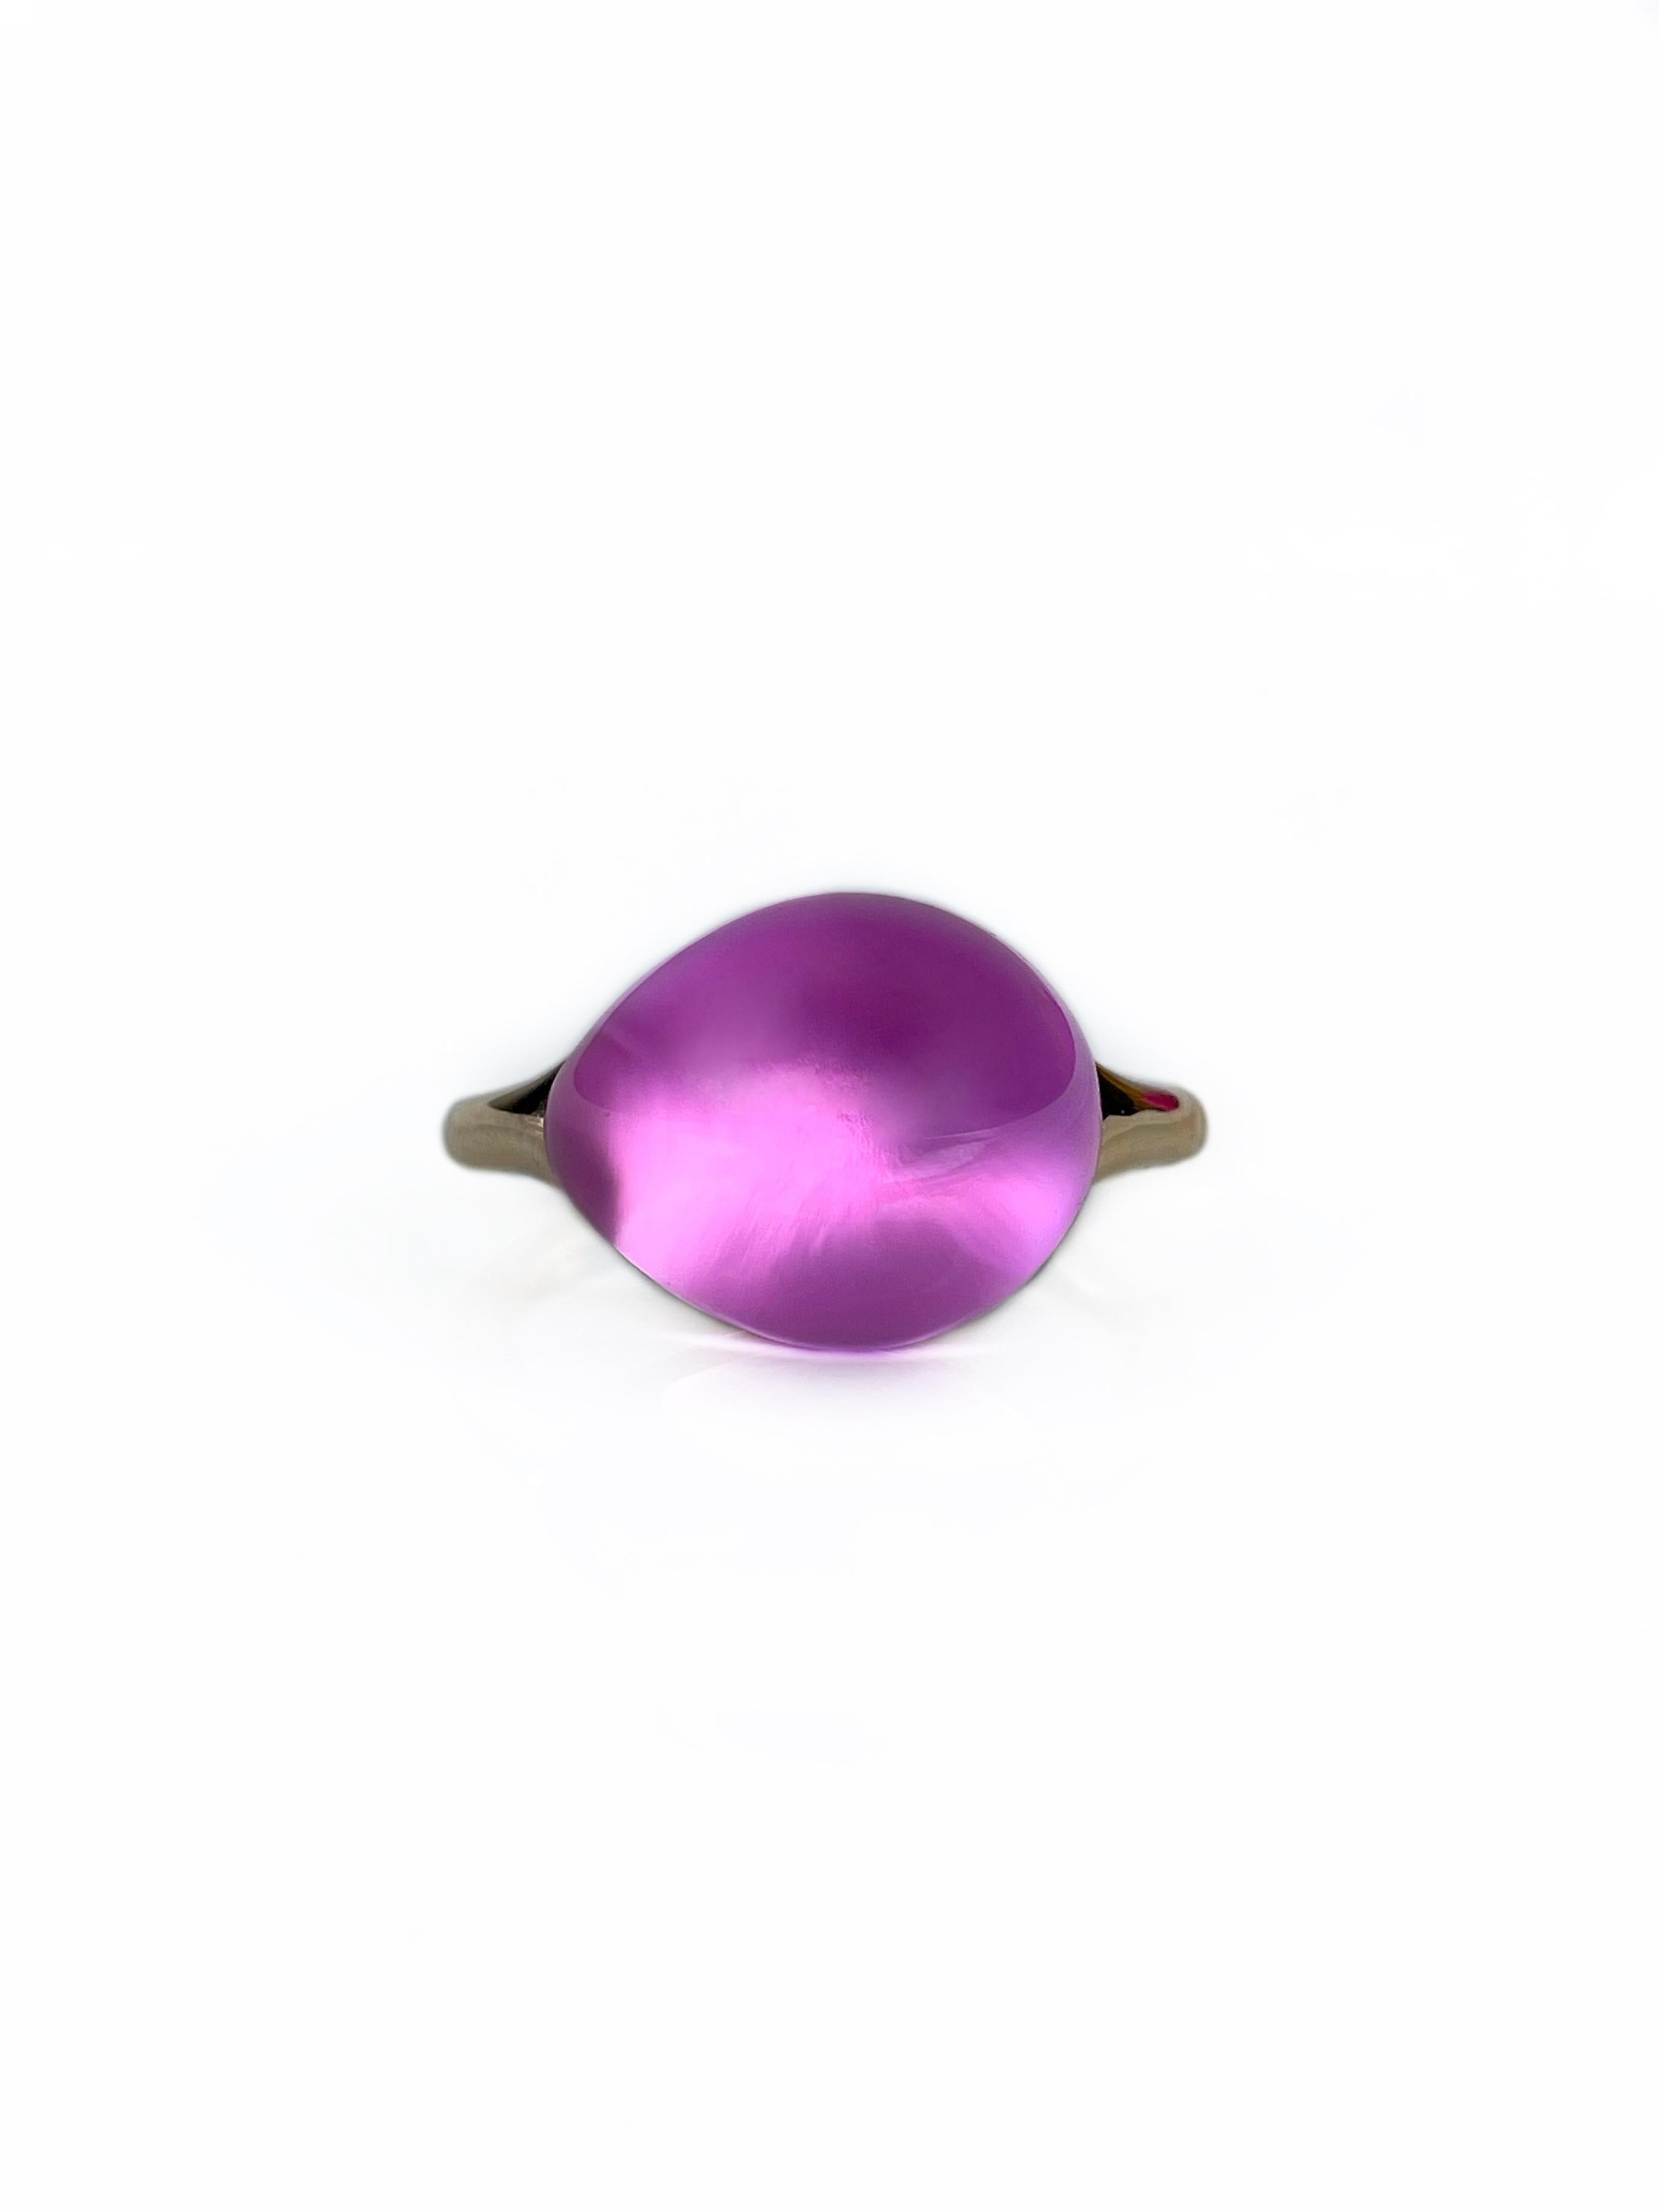 Pomellato “Rouge Passion” 9 Karat Gold Pink Cabochon Cut Sapphire Cocktail Ring 1